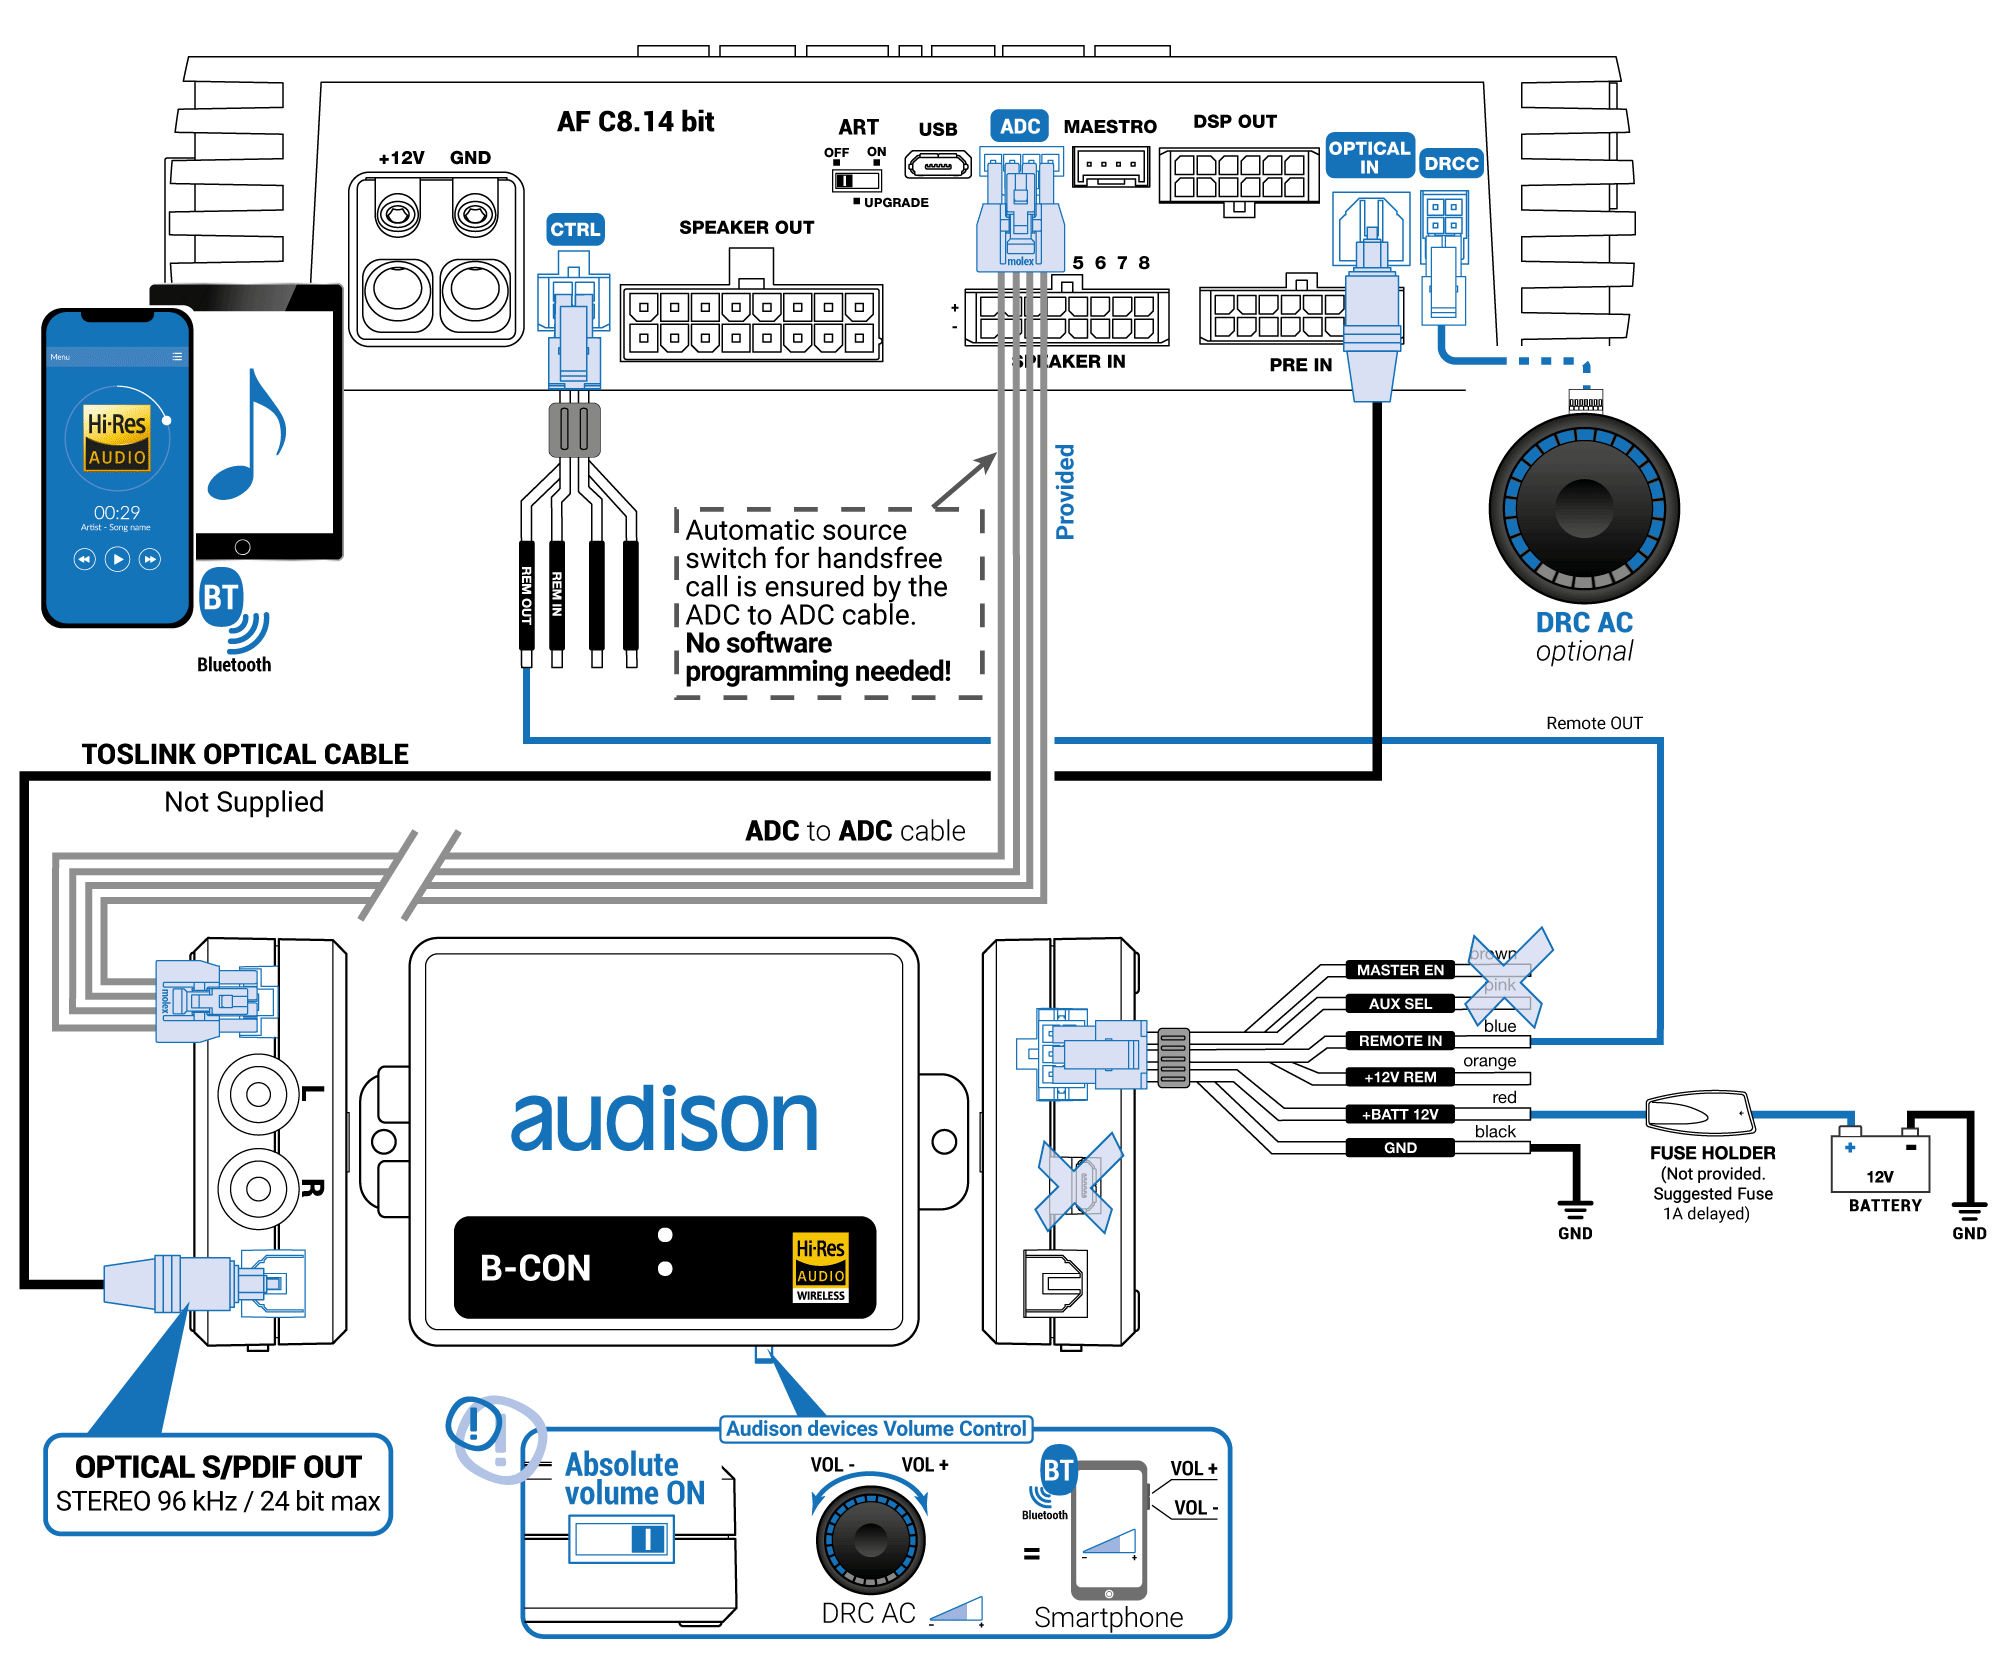 5_AF-bit-+-B-CON-Absolute-Volume-ON-with-ADC-Control.png